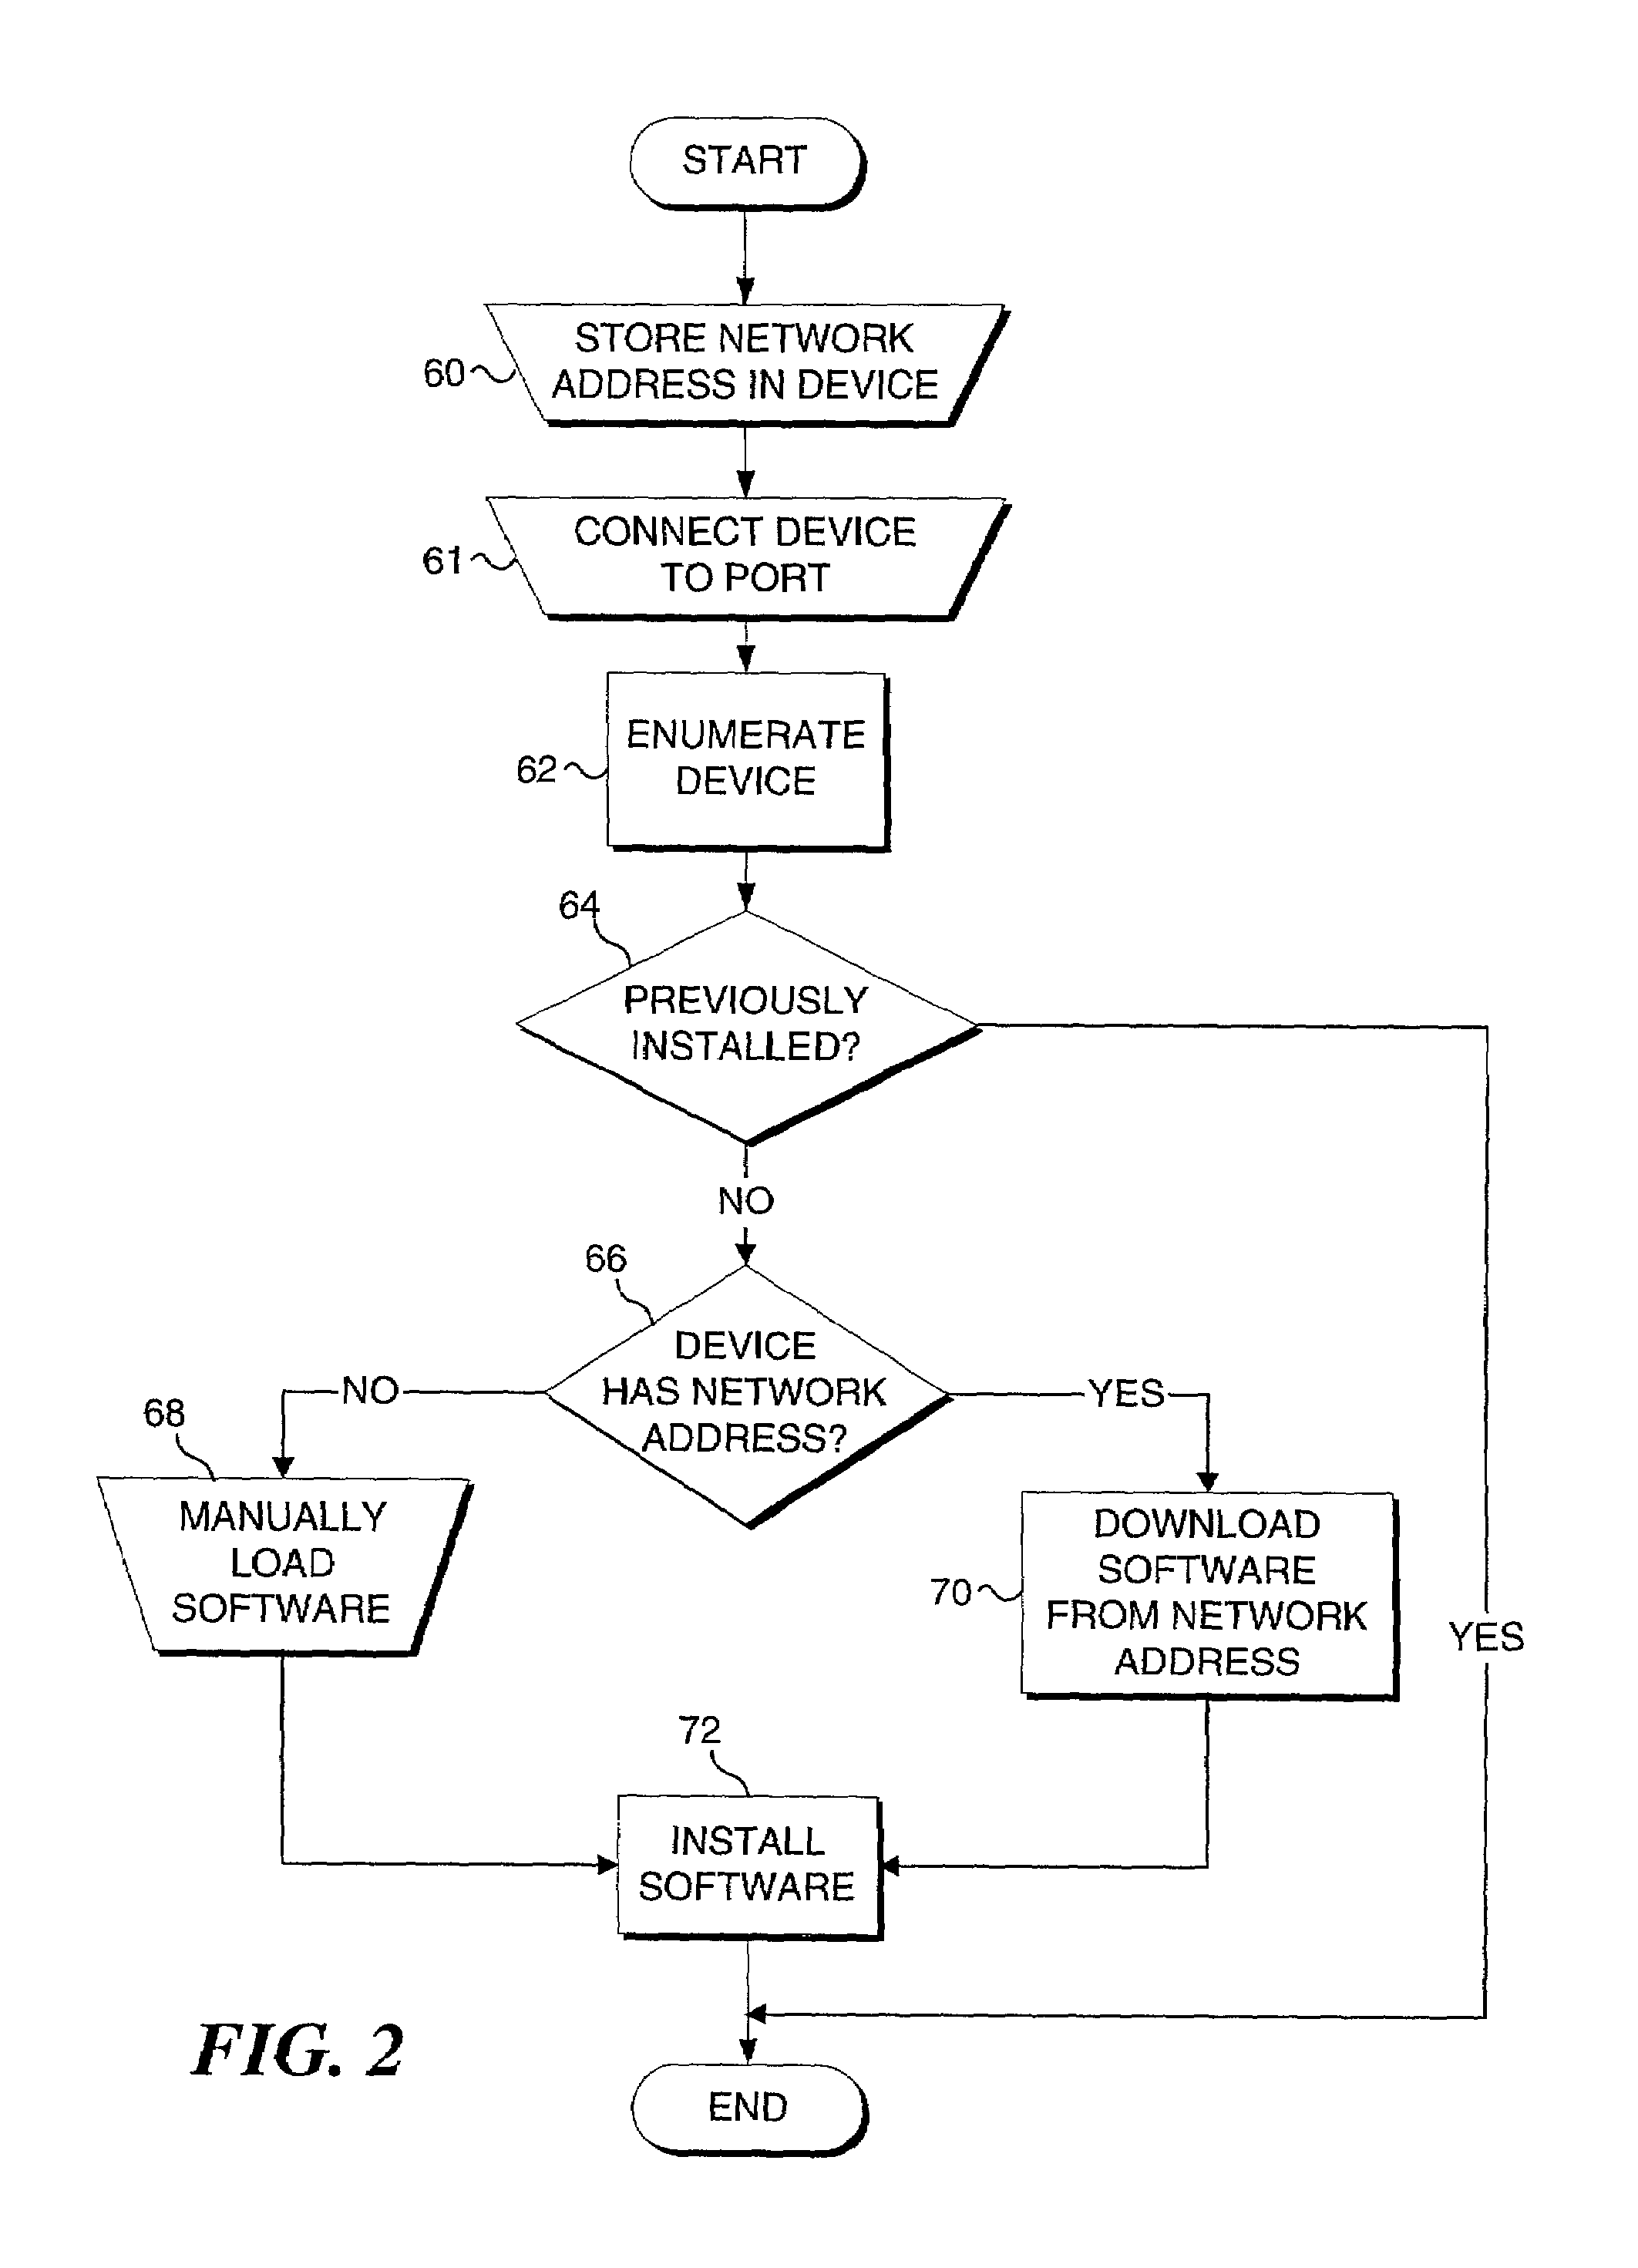 Method and system to access software pertinent to an electronic peripheral device based on an address stored in a peripheral device